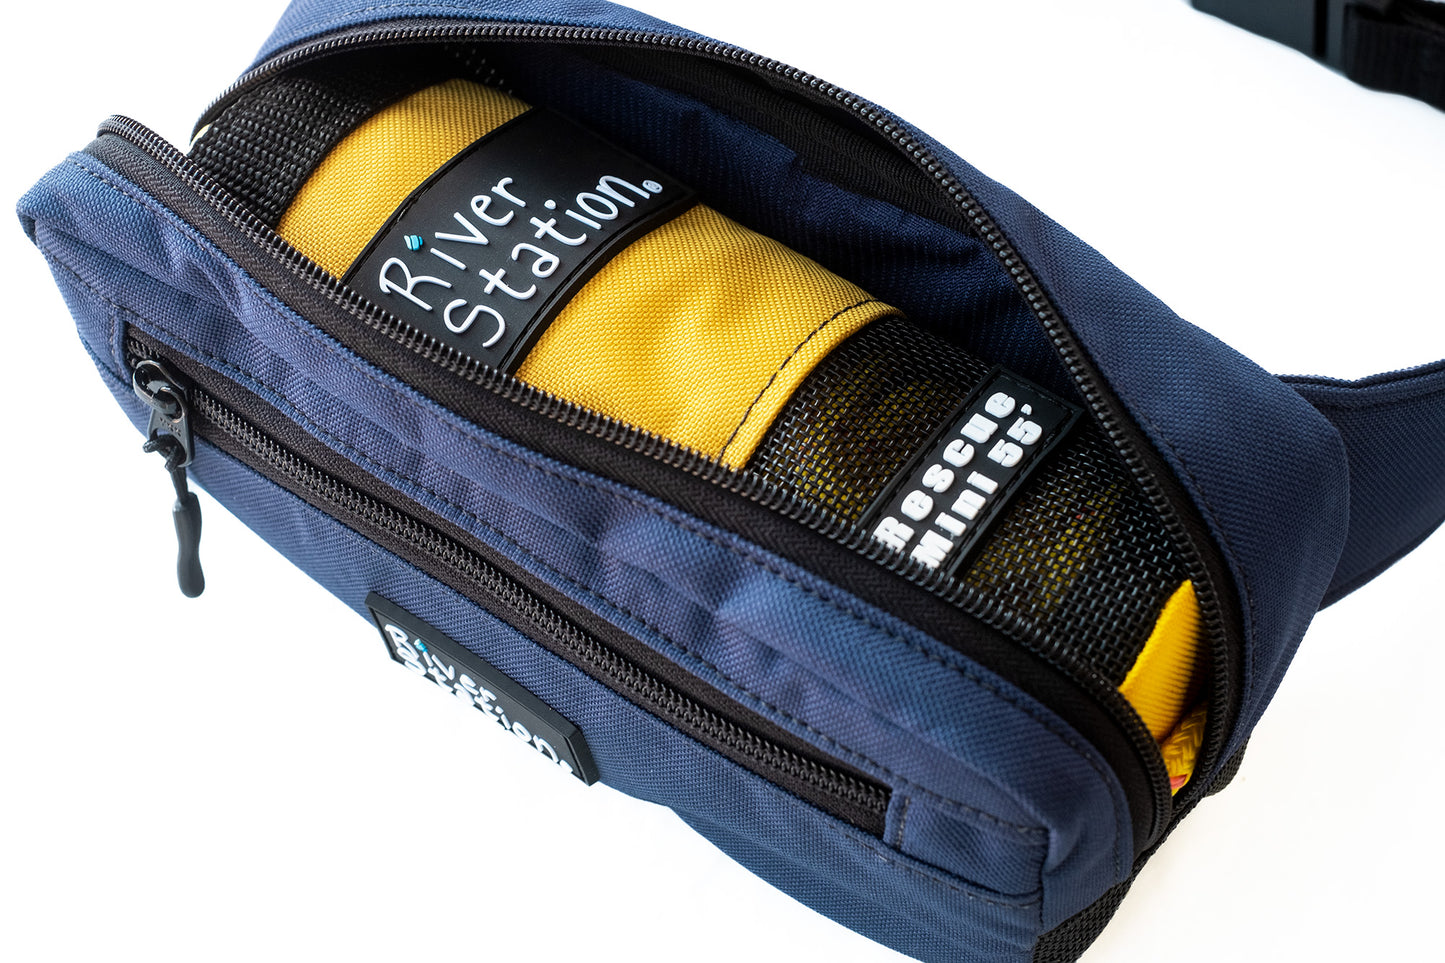 Gold and Navy whitewater waist throw bags.